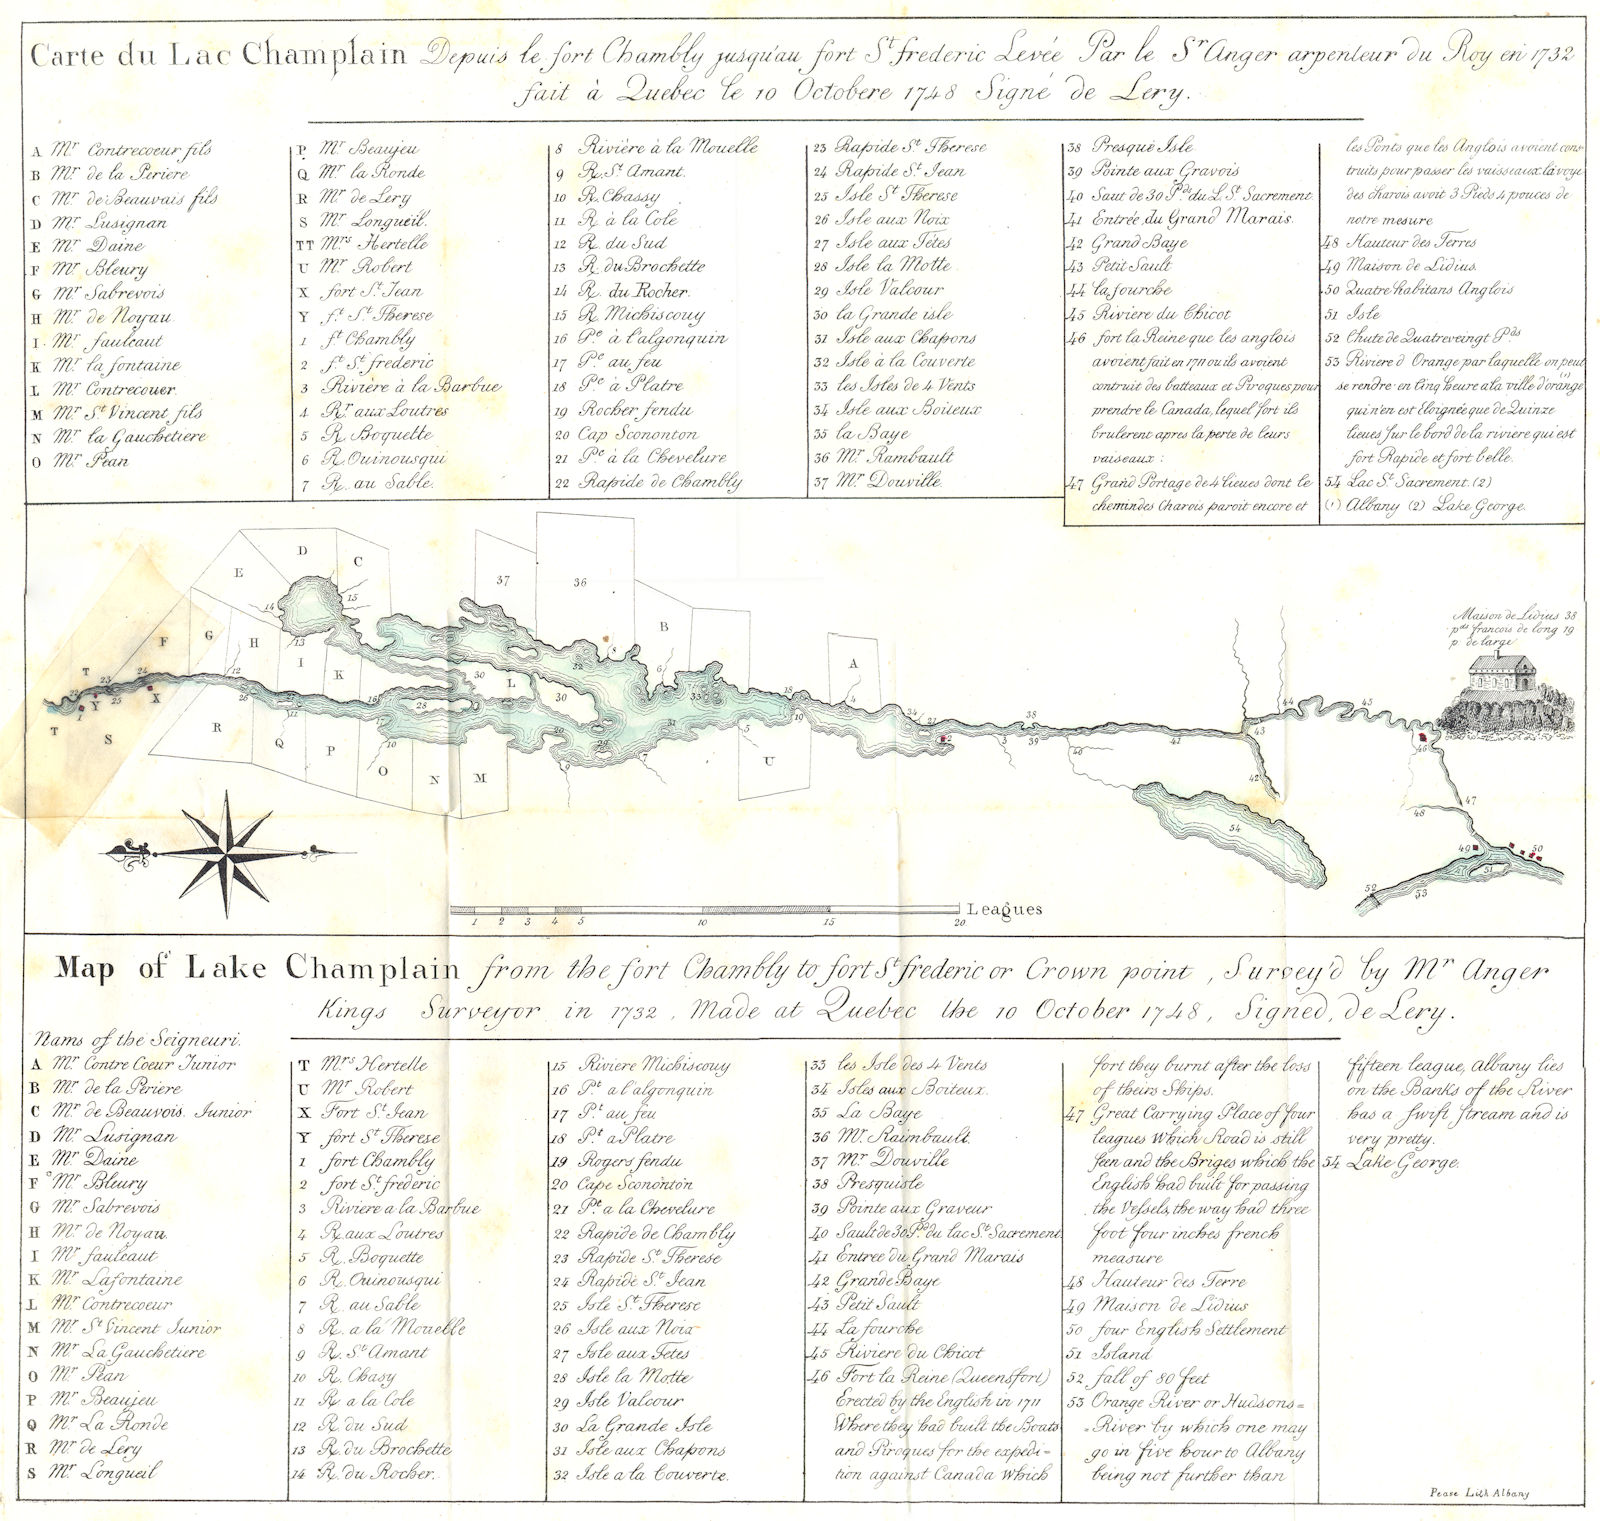 LAKE CHAMPLAIN. Property rights in 1732 Ft Chambly St Frederic Crown Pt 1849 map